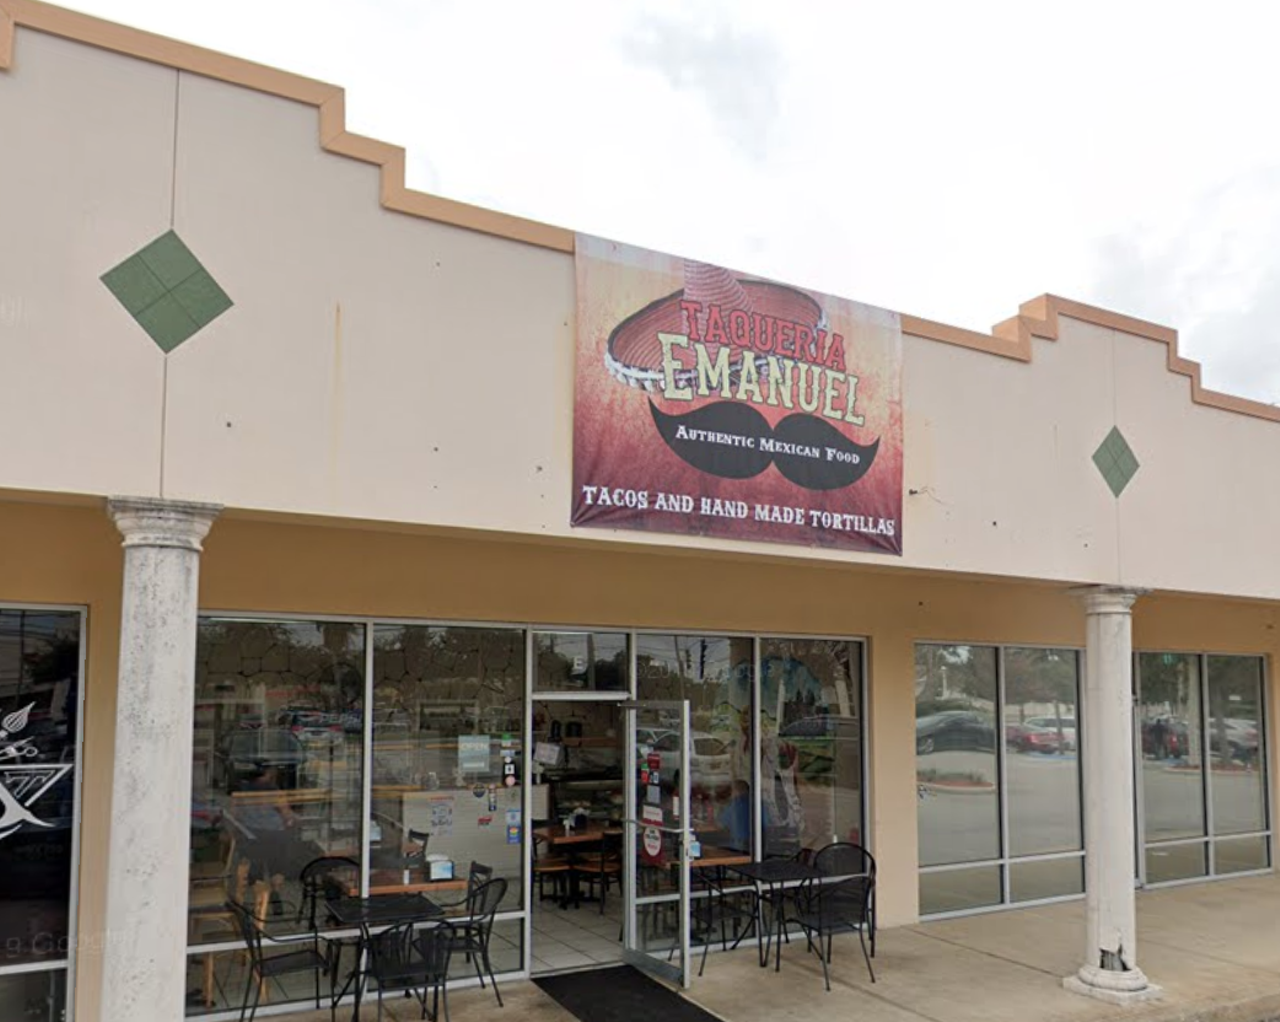 Taqueria Emanuel
2800 N MacDill Ave., Tampa, 813-453-5954
Who wants to eat next to a cemetery? You should think twice if your answer was “not me” because this taqueria brings an authentic Mexican experience for all taco lovers. 
Photo via Google Maps